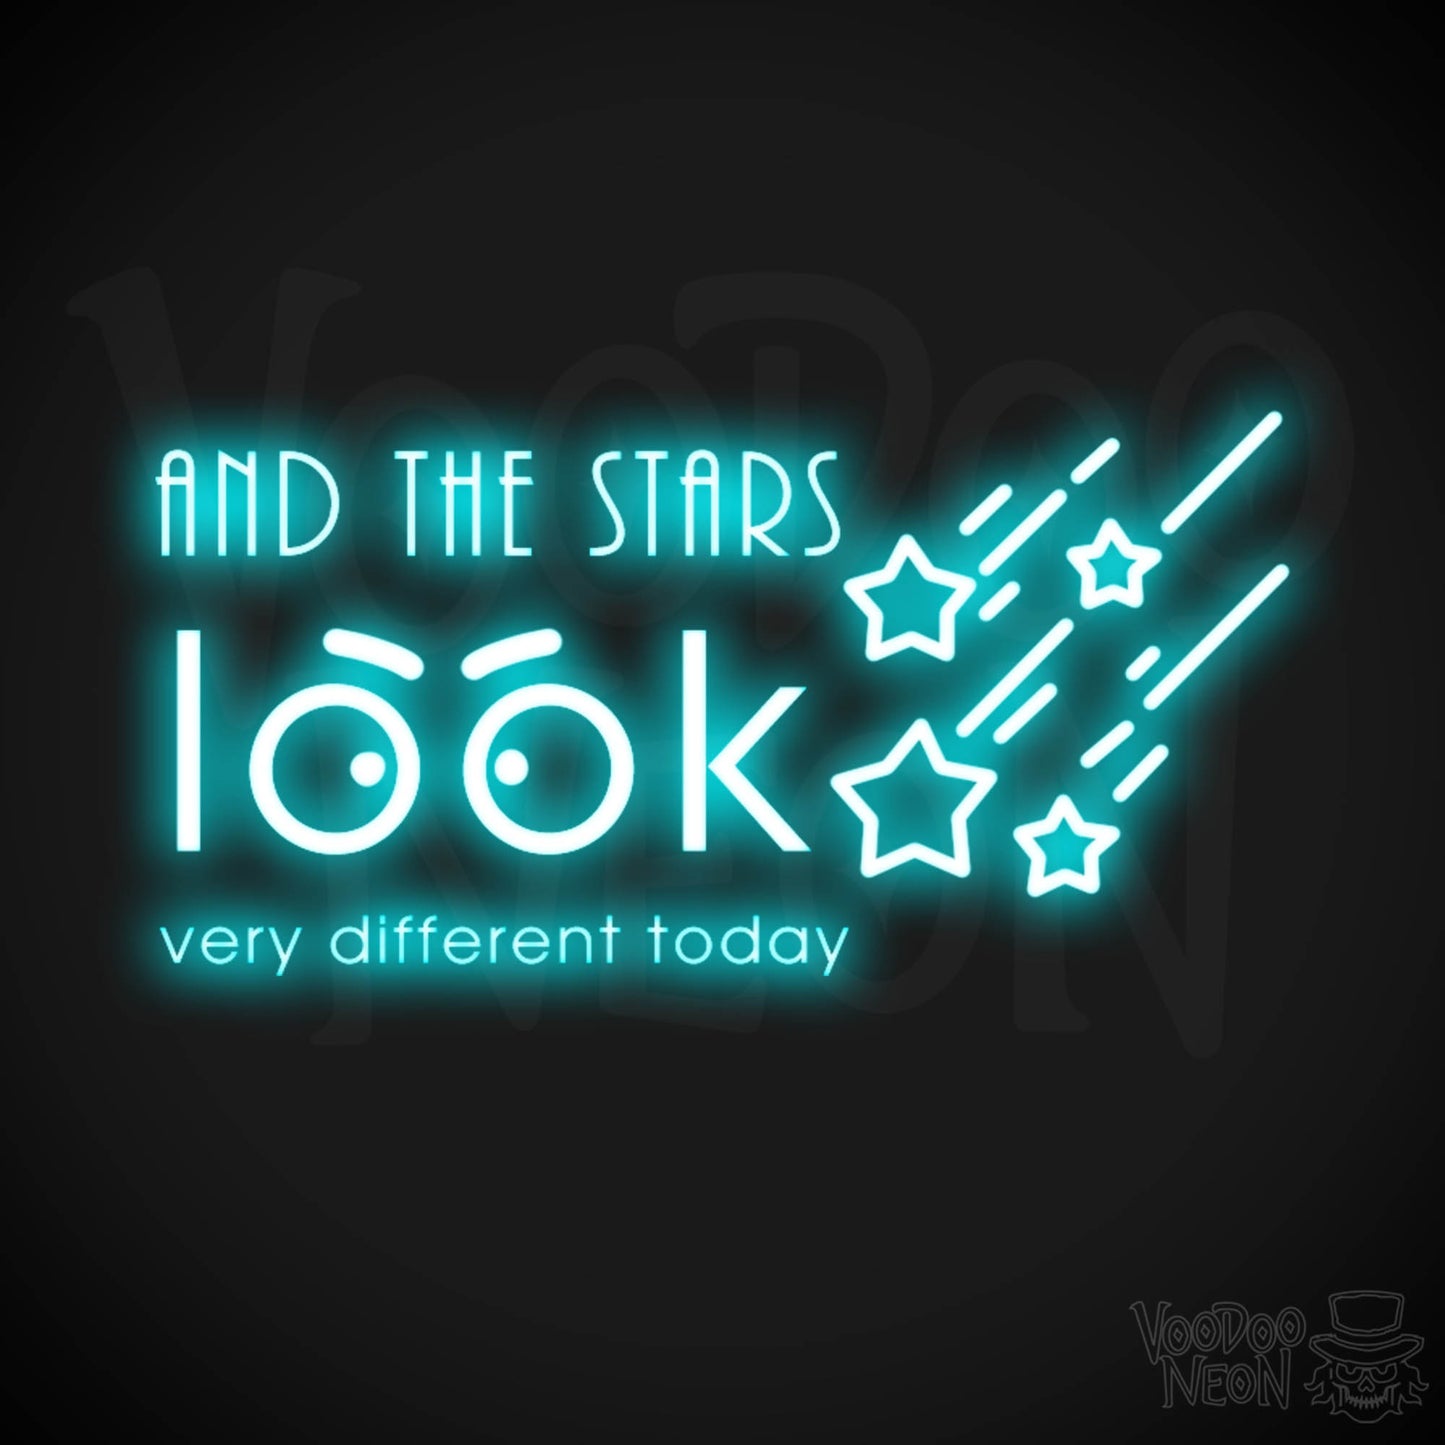 And the Stars Look Very Different Today Neon Sign - LED Wall Art - Color Ice Blue